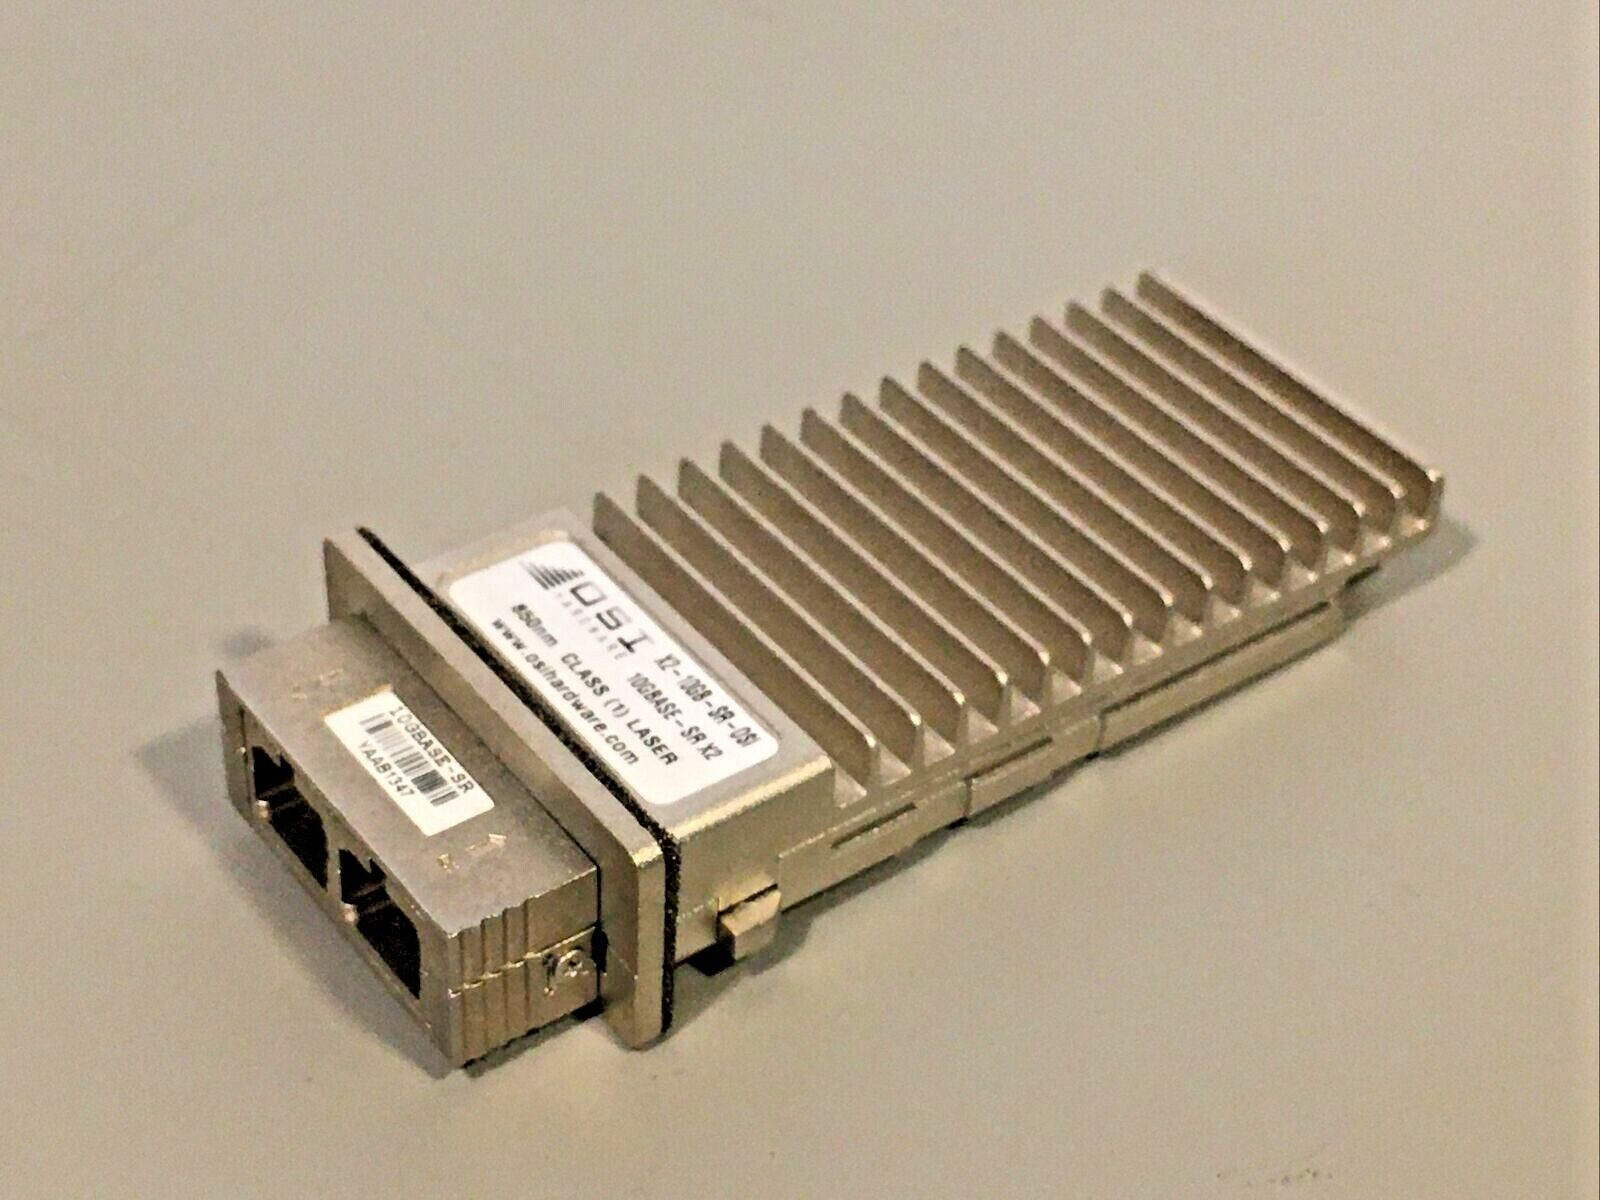 Lot of 5 Cisco X2-10GB-LR 10GBase-LR X2 Module transceiver Working Pull